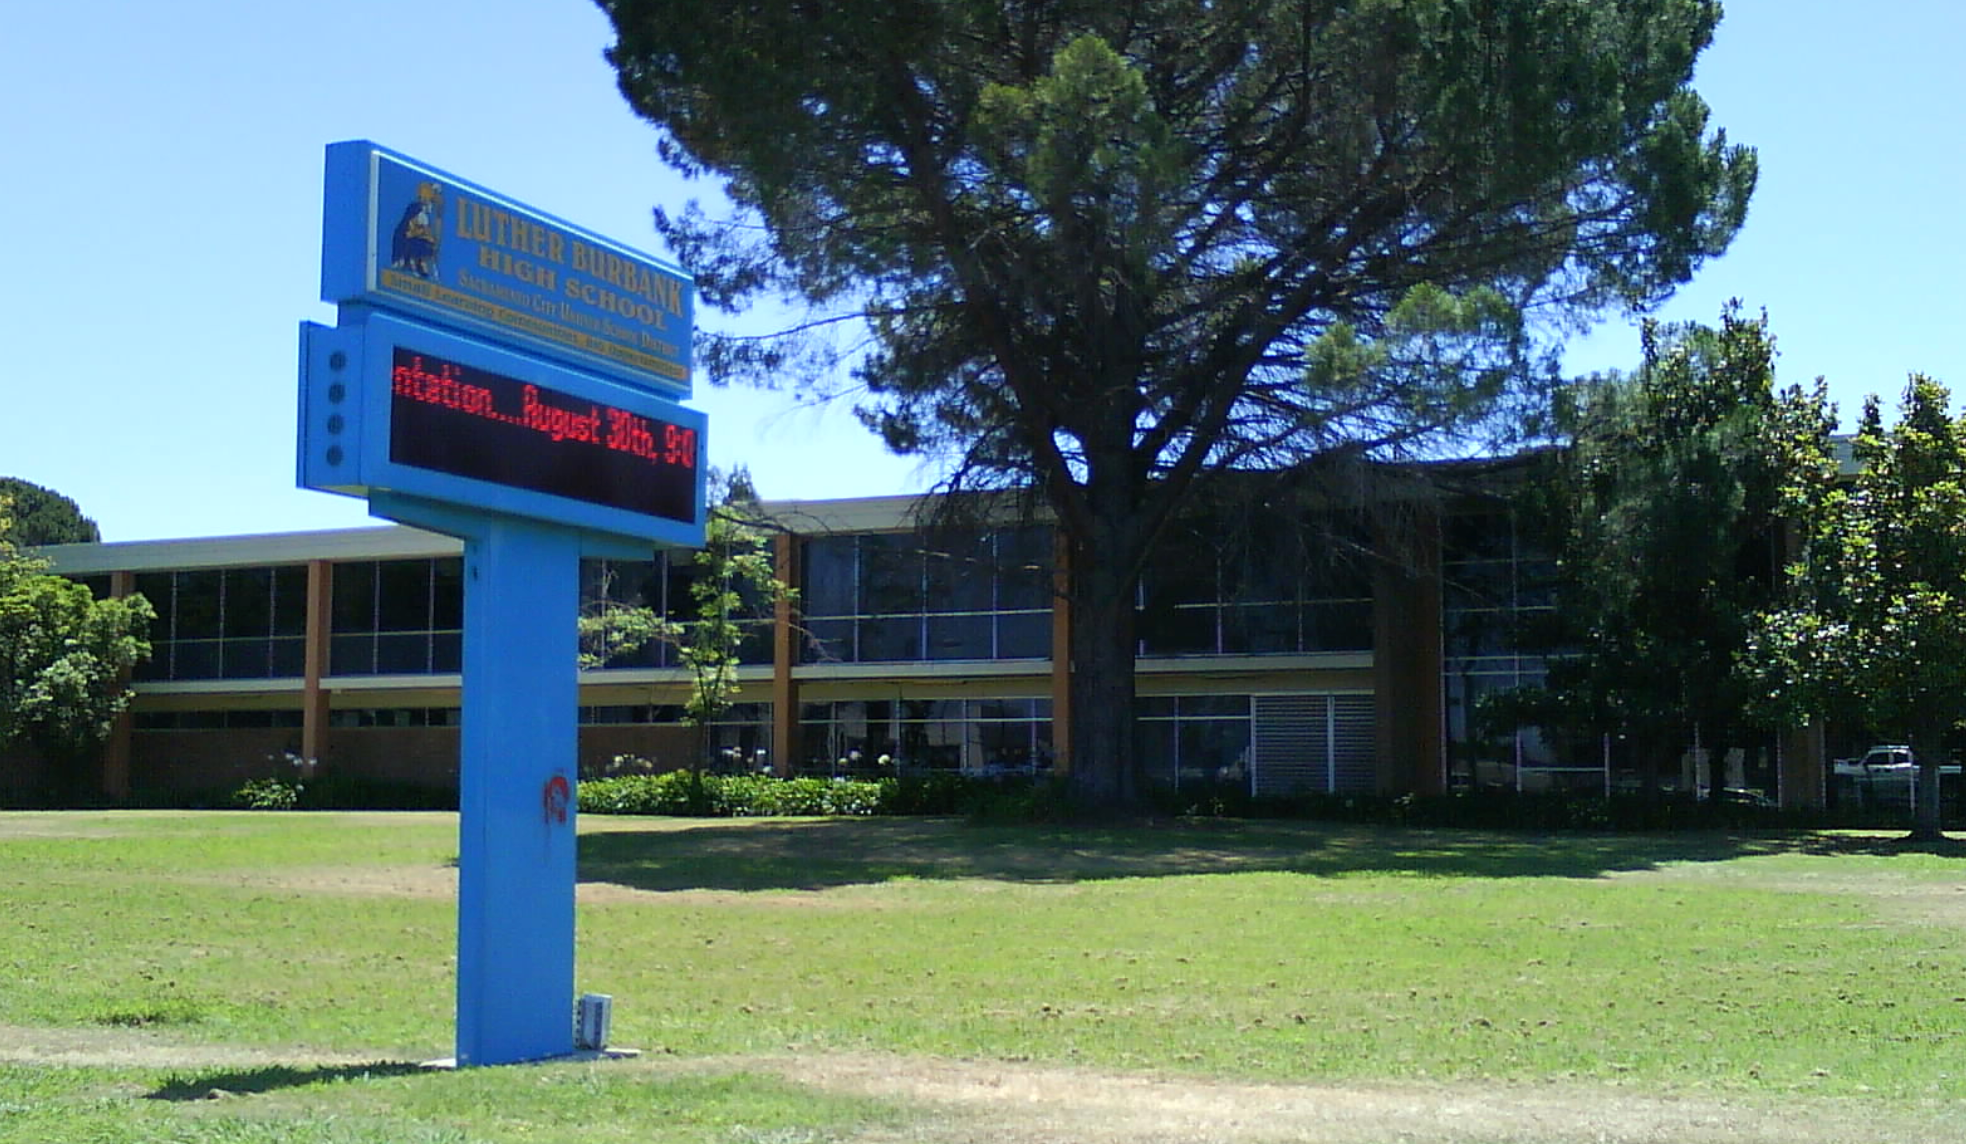 Sacramento’s Luther Burbank High School, where teacher Alex Nguyen was suspended last month over wildly inappropriate test questions.